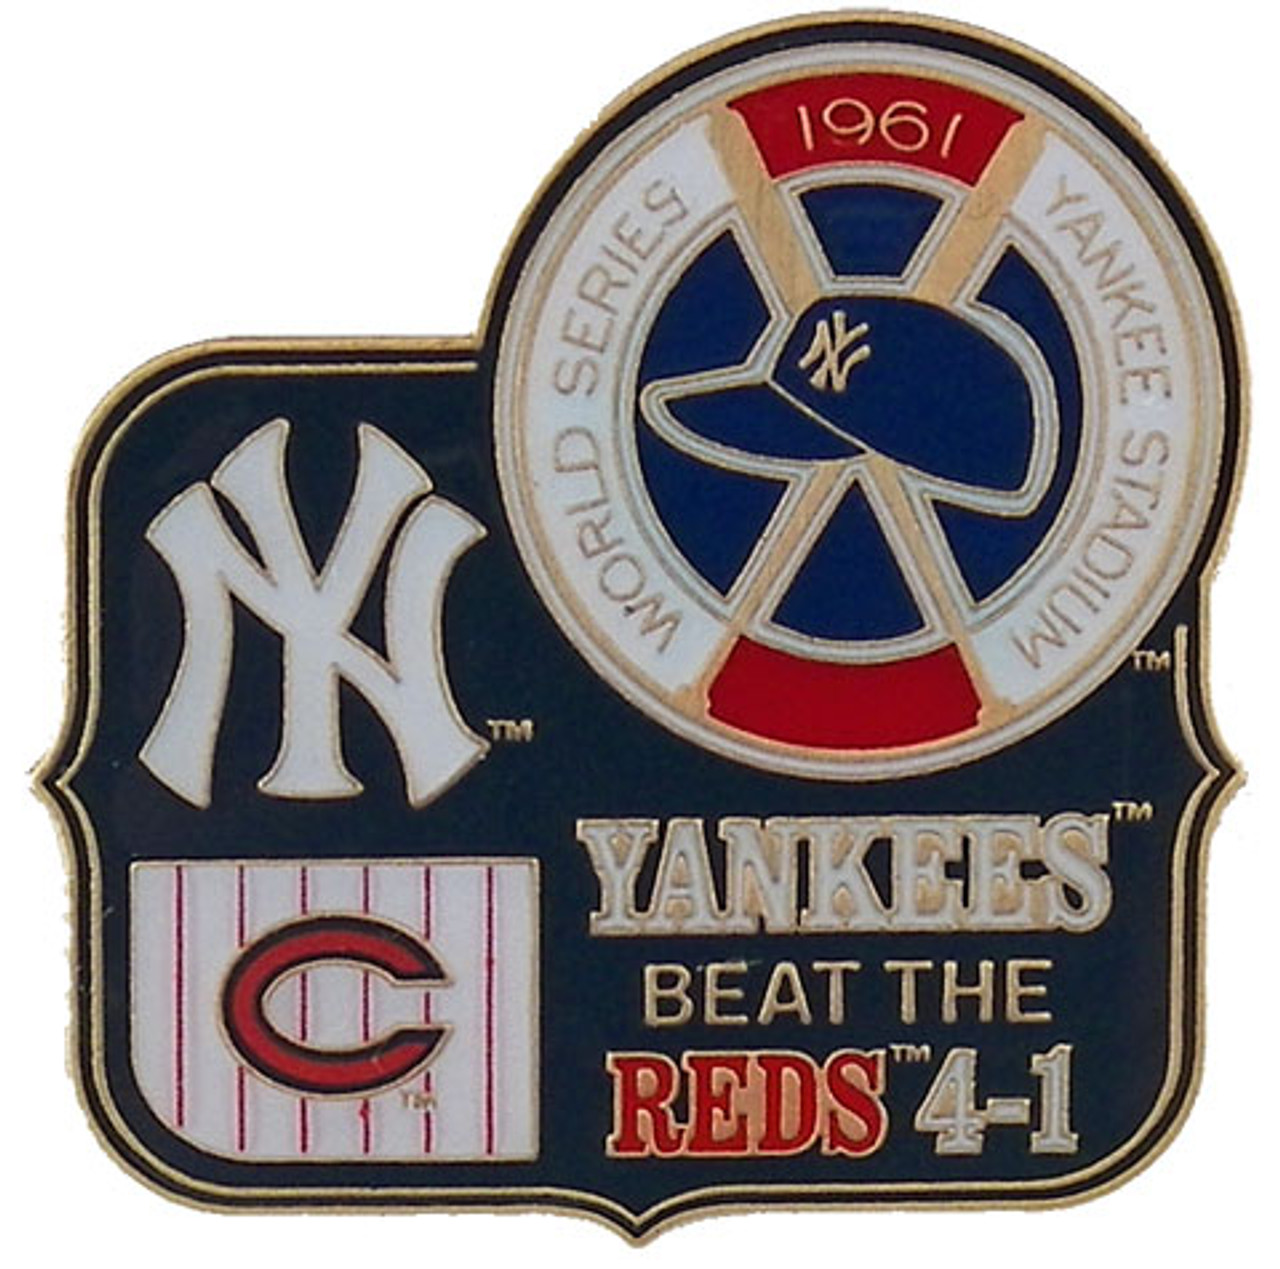 Reds sweep the Yankees to win the 1976 World Series 